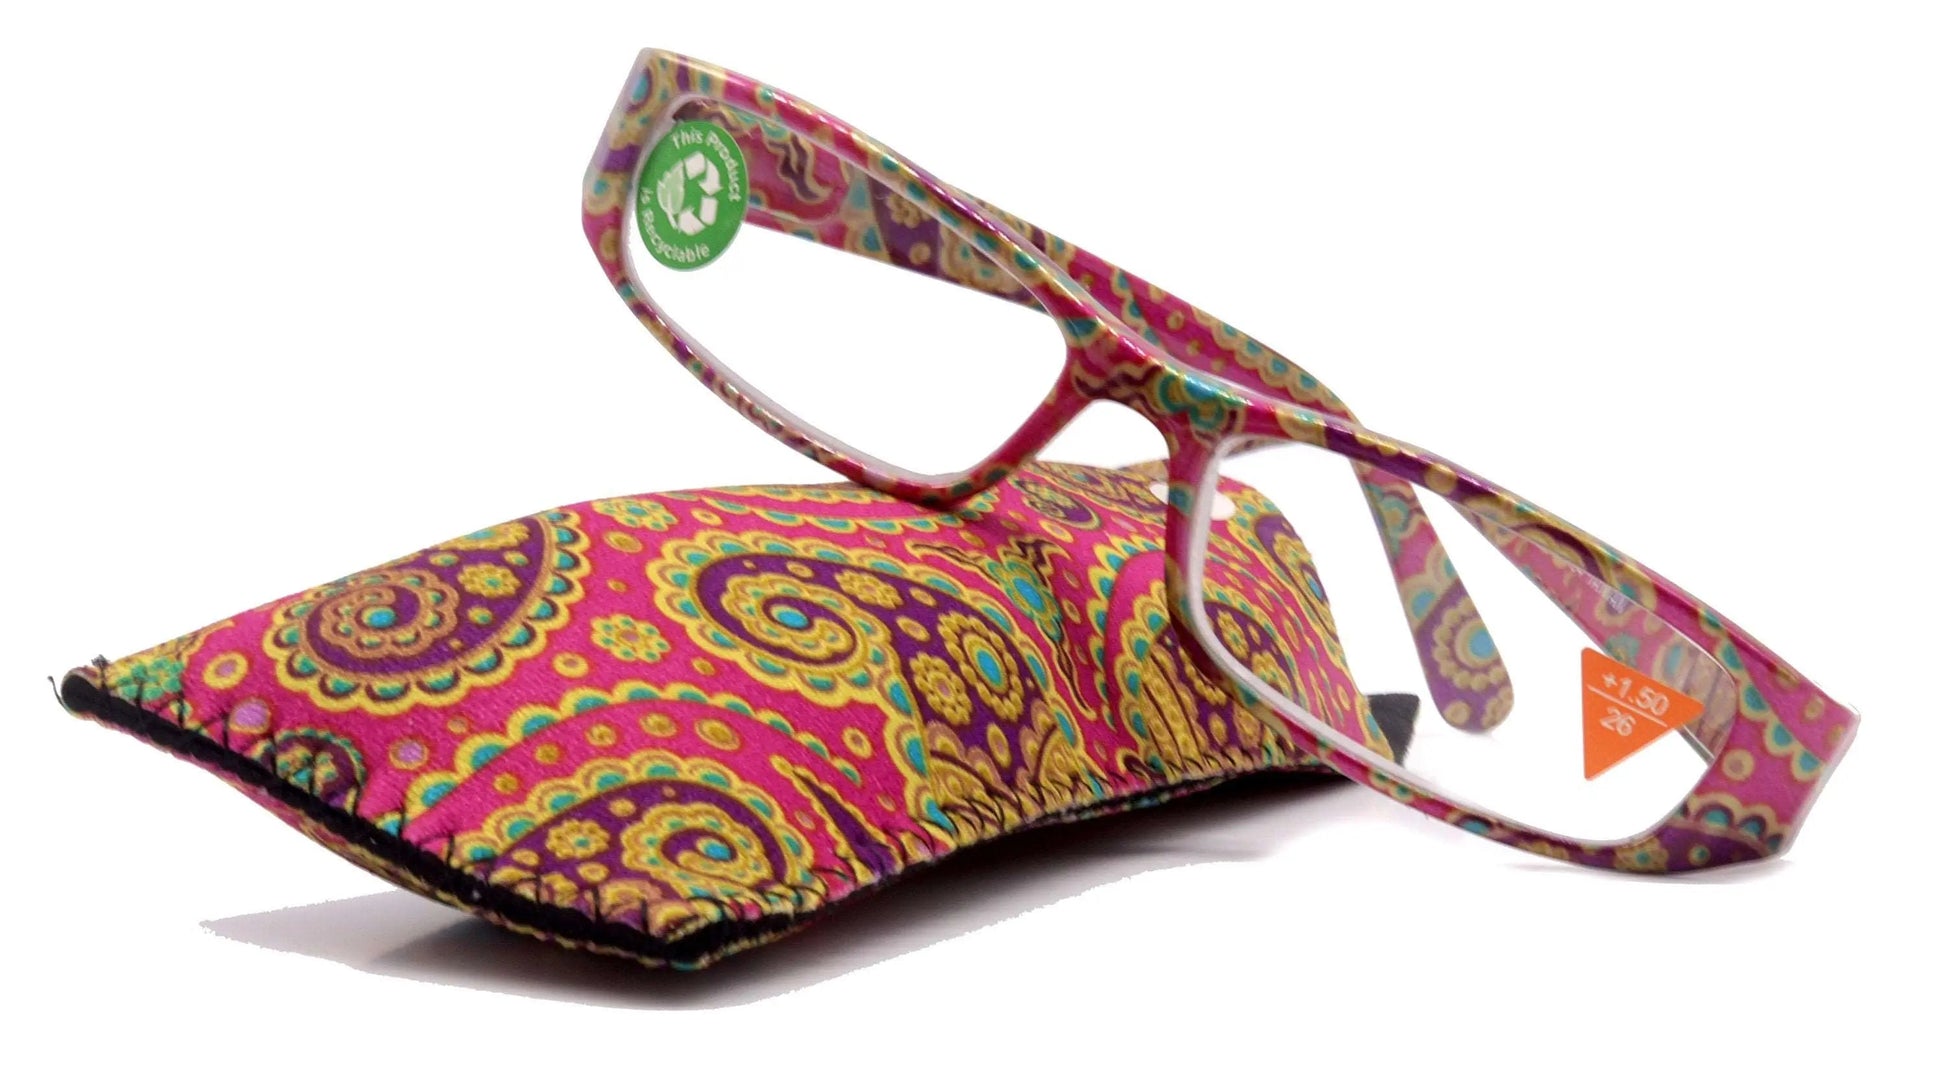 Florence, (Premium) Reading Glasses, High End Readers +1.25 to +3 Magnifying. (Paisley, Pink) optical, Rectangular Frame. NY Fifth Avenue.